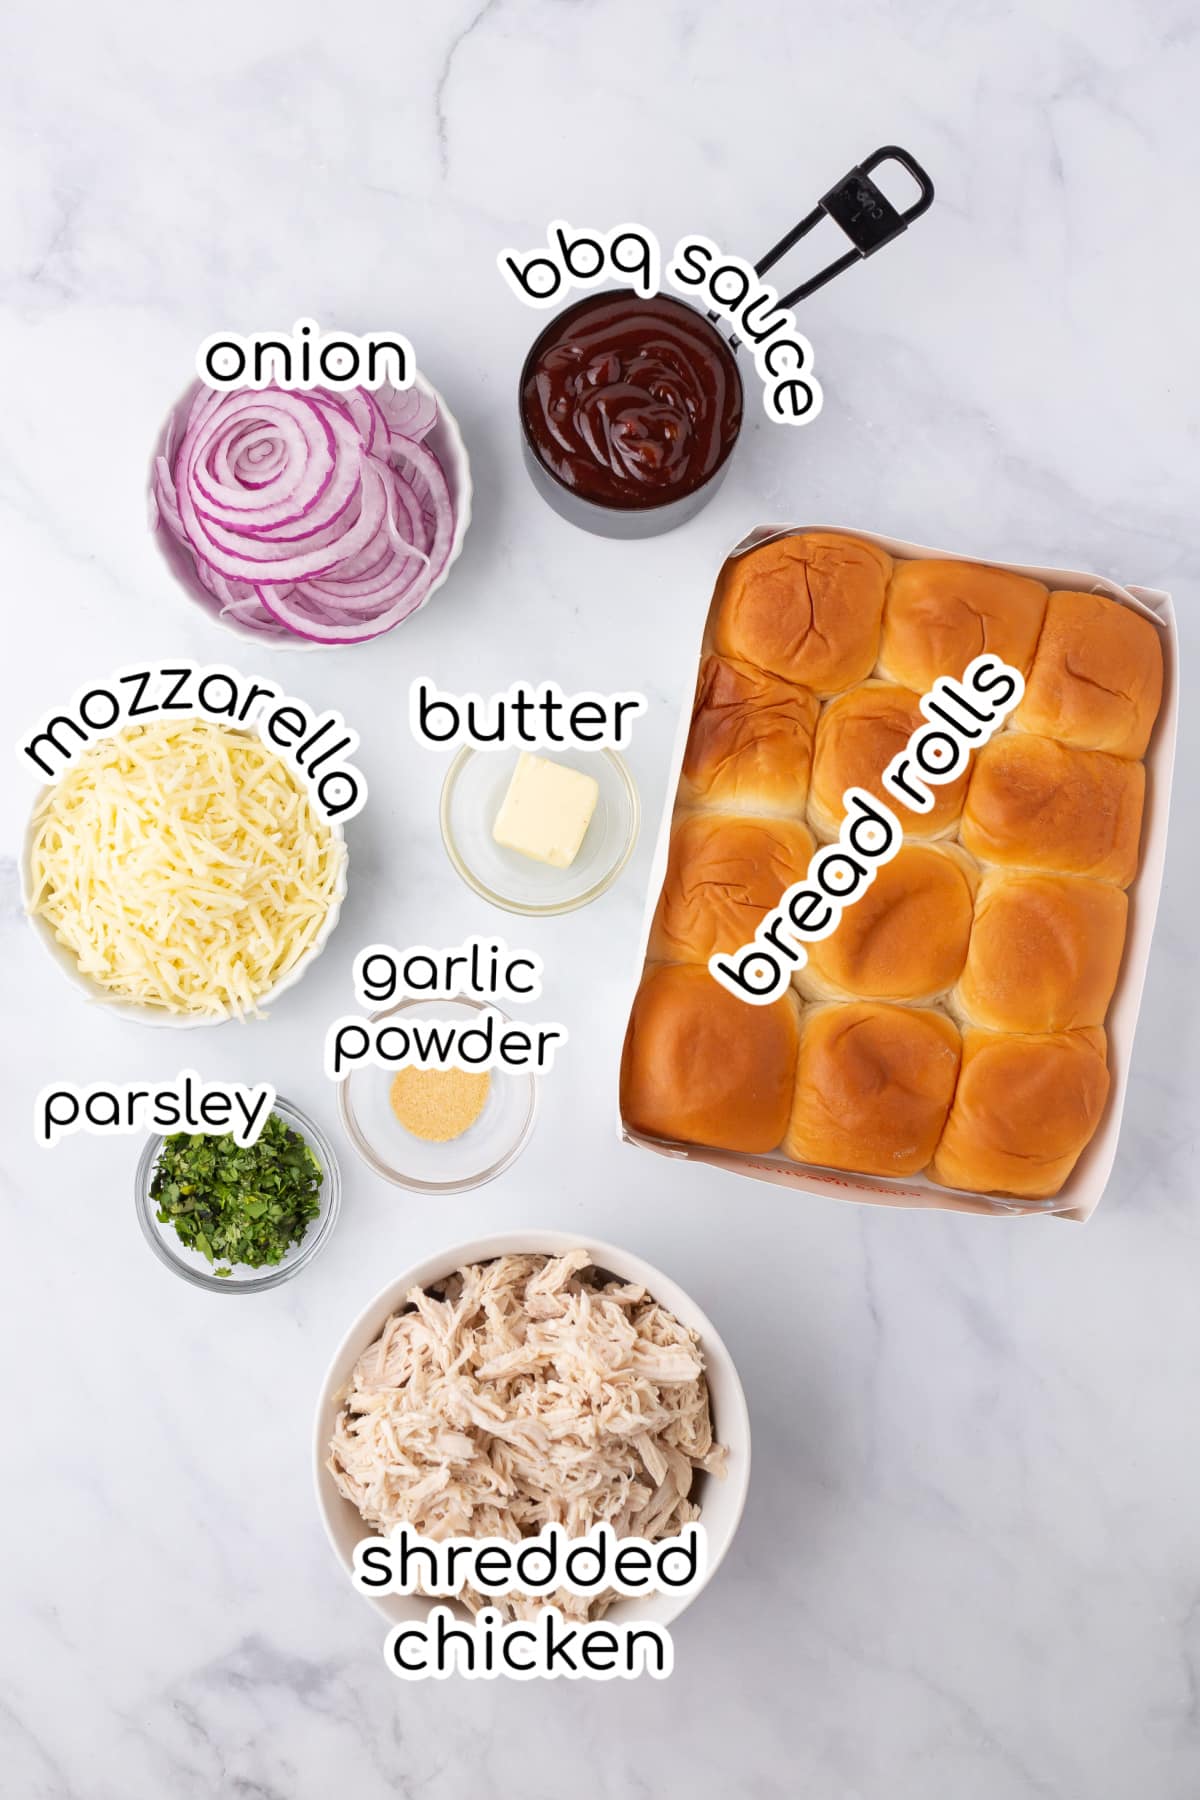 Ingredients for this sliders recipe.